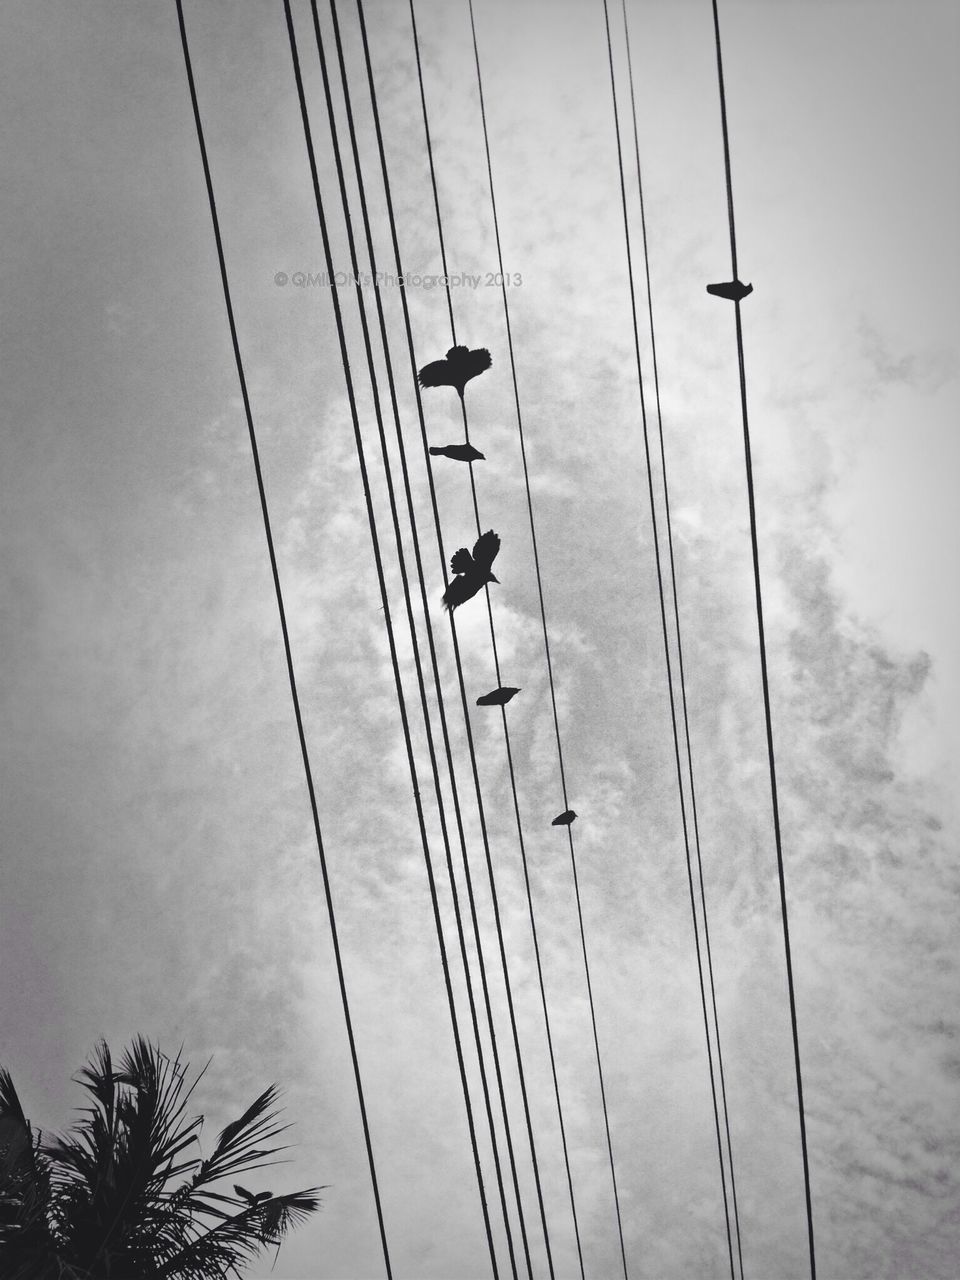 low angle view, power line, cable, sky, connection, electricity, transportation, power supply, electricity pylon, flying, technology, silhouette, overhead cable car, cloud - sky, fuel and power generation, mode of transport, bird, day, outdoors, power cable